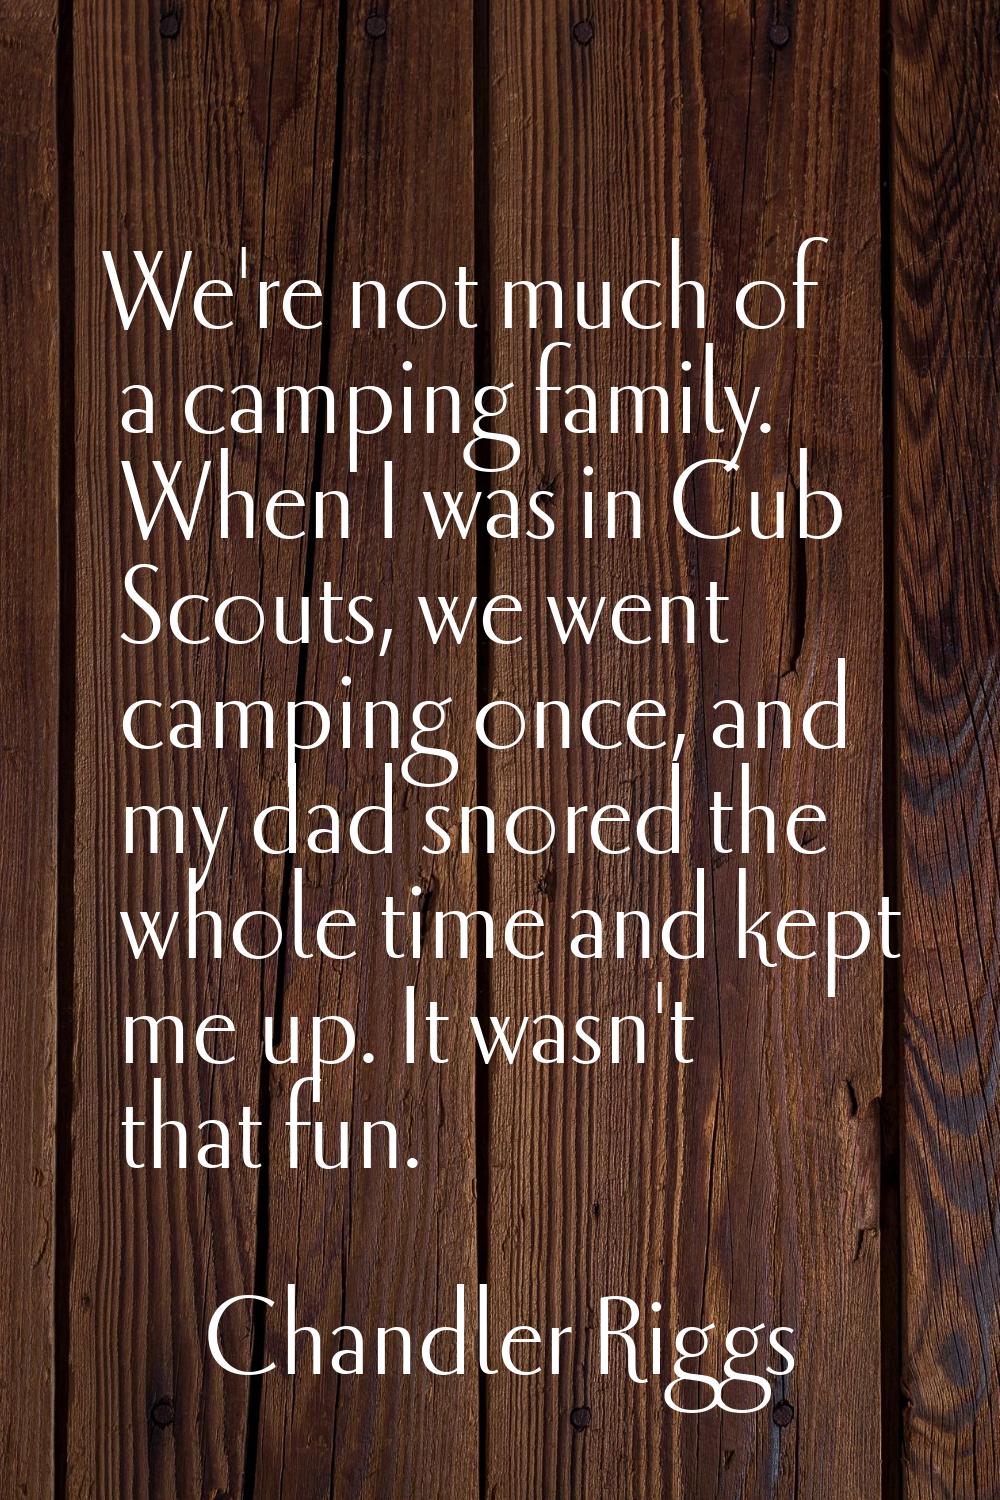 We're not much of a camping family. When I was in Cub Scouts, we went camping once, and my dad snor